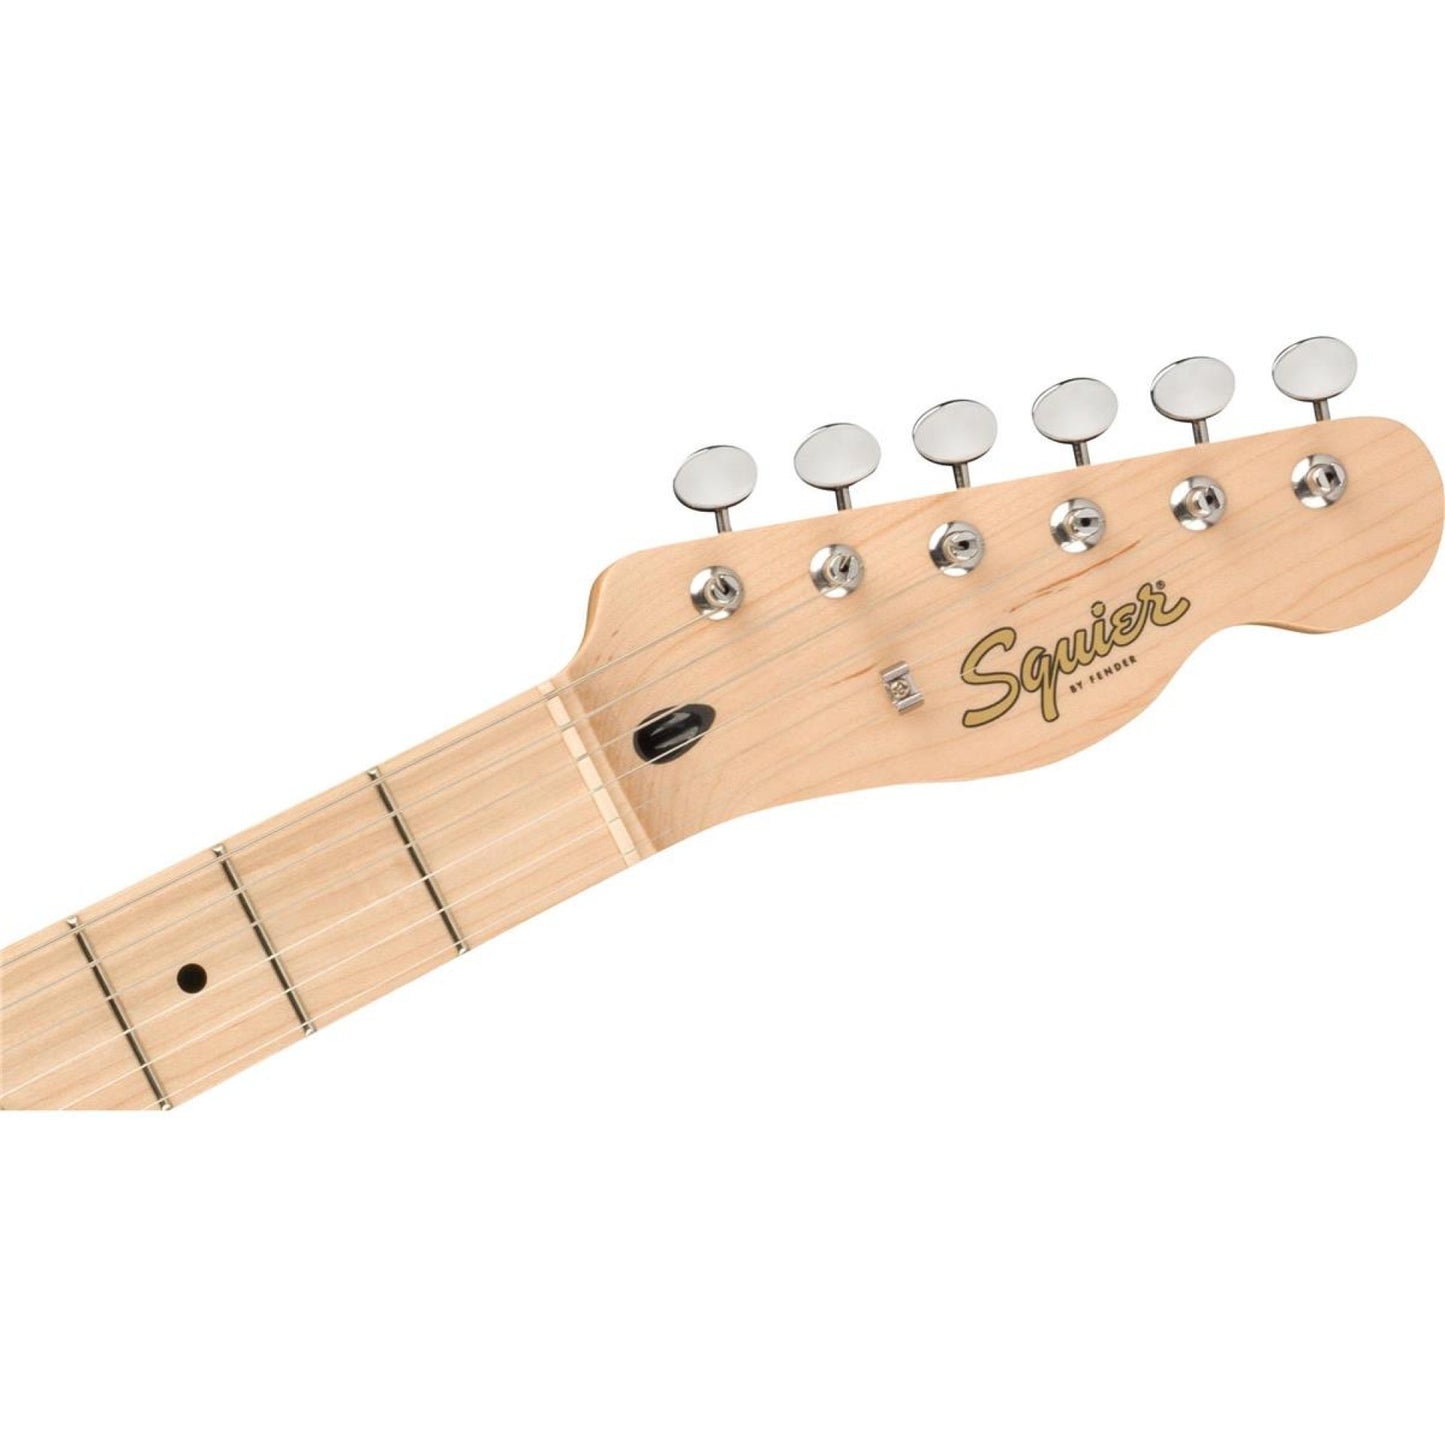 Squier Paranormal Offset Telecaster Electric Guitar, Maple Fingerboard, Natural